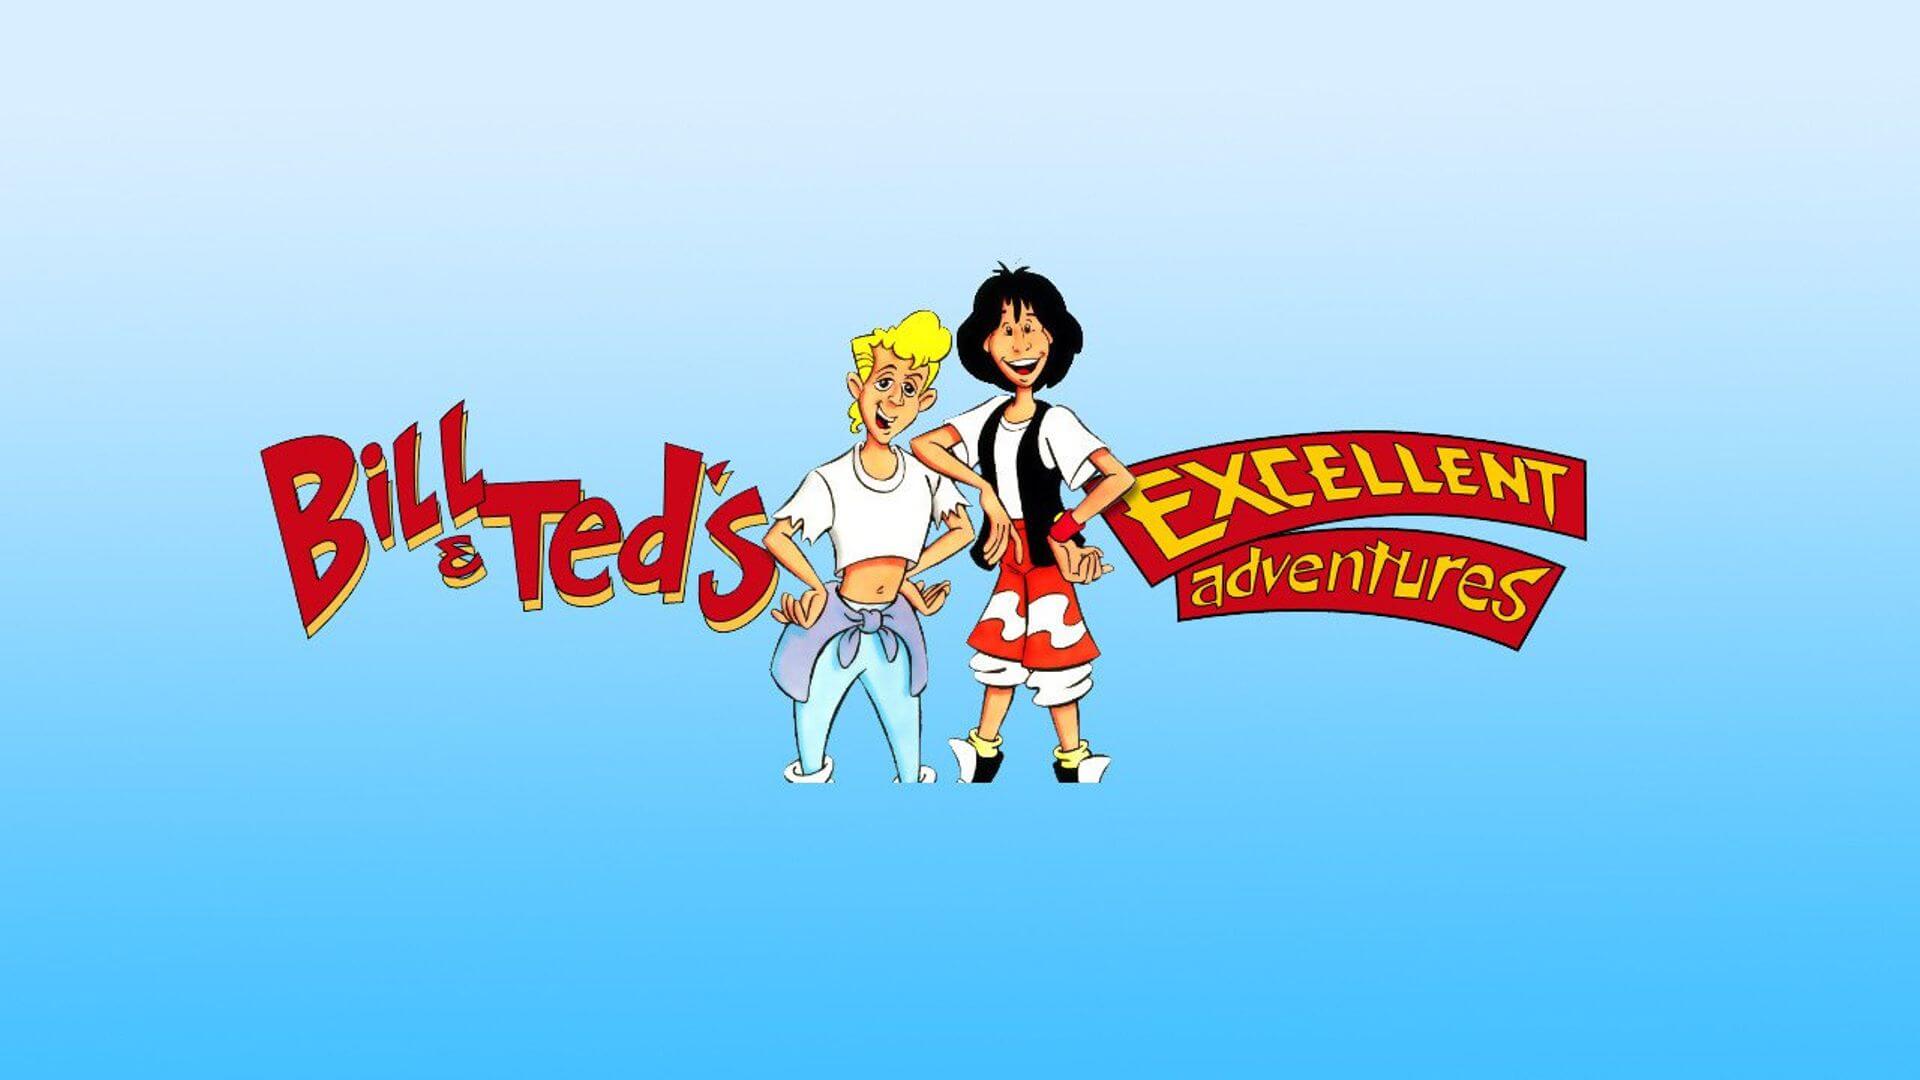 Bill & Ted's Excellent Adventures animated series DVD